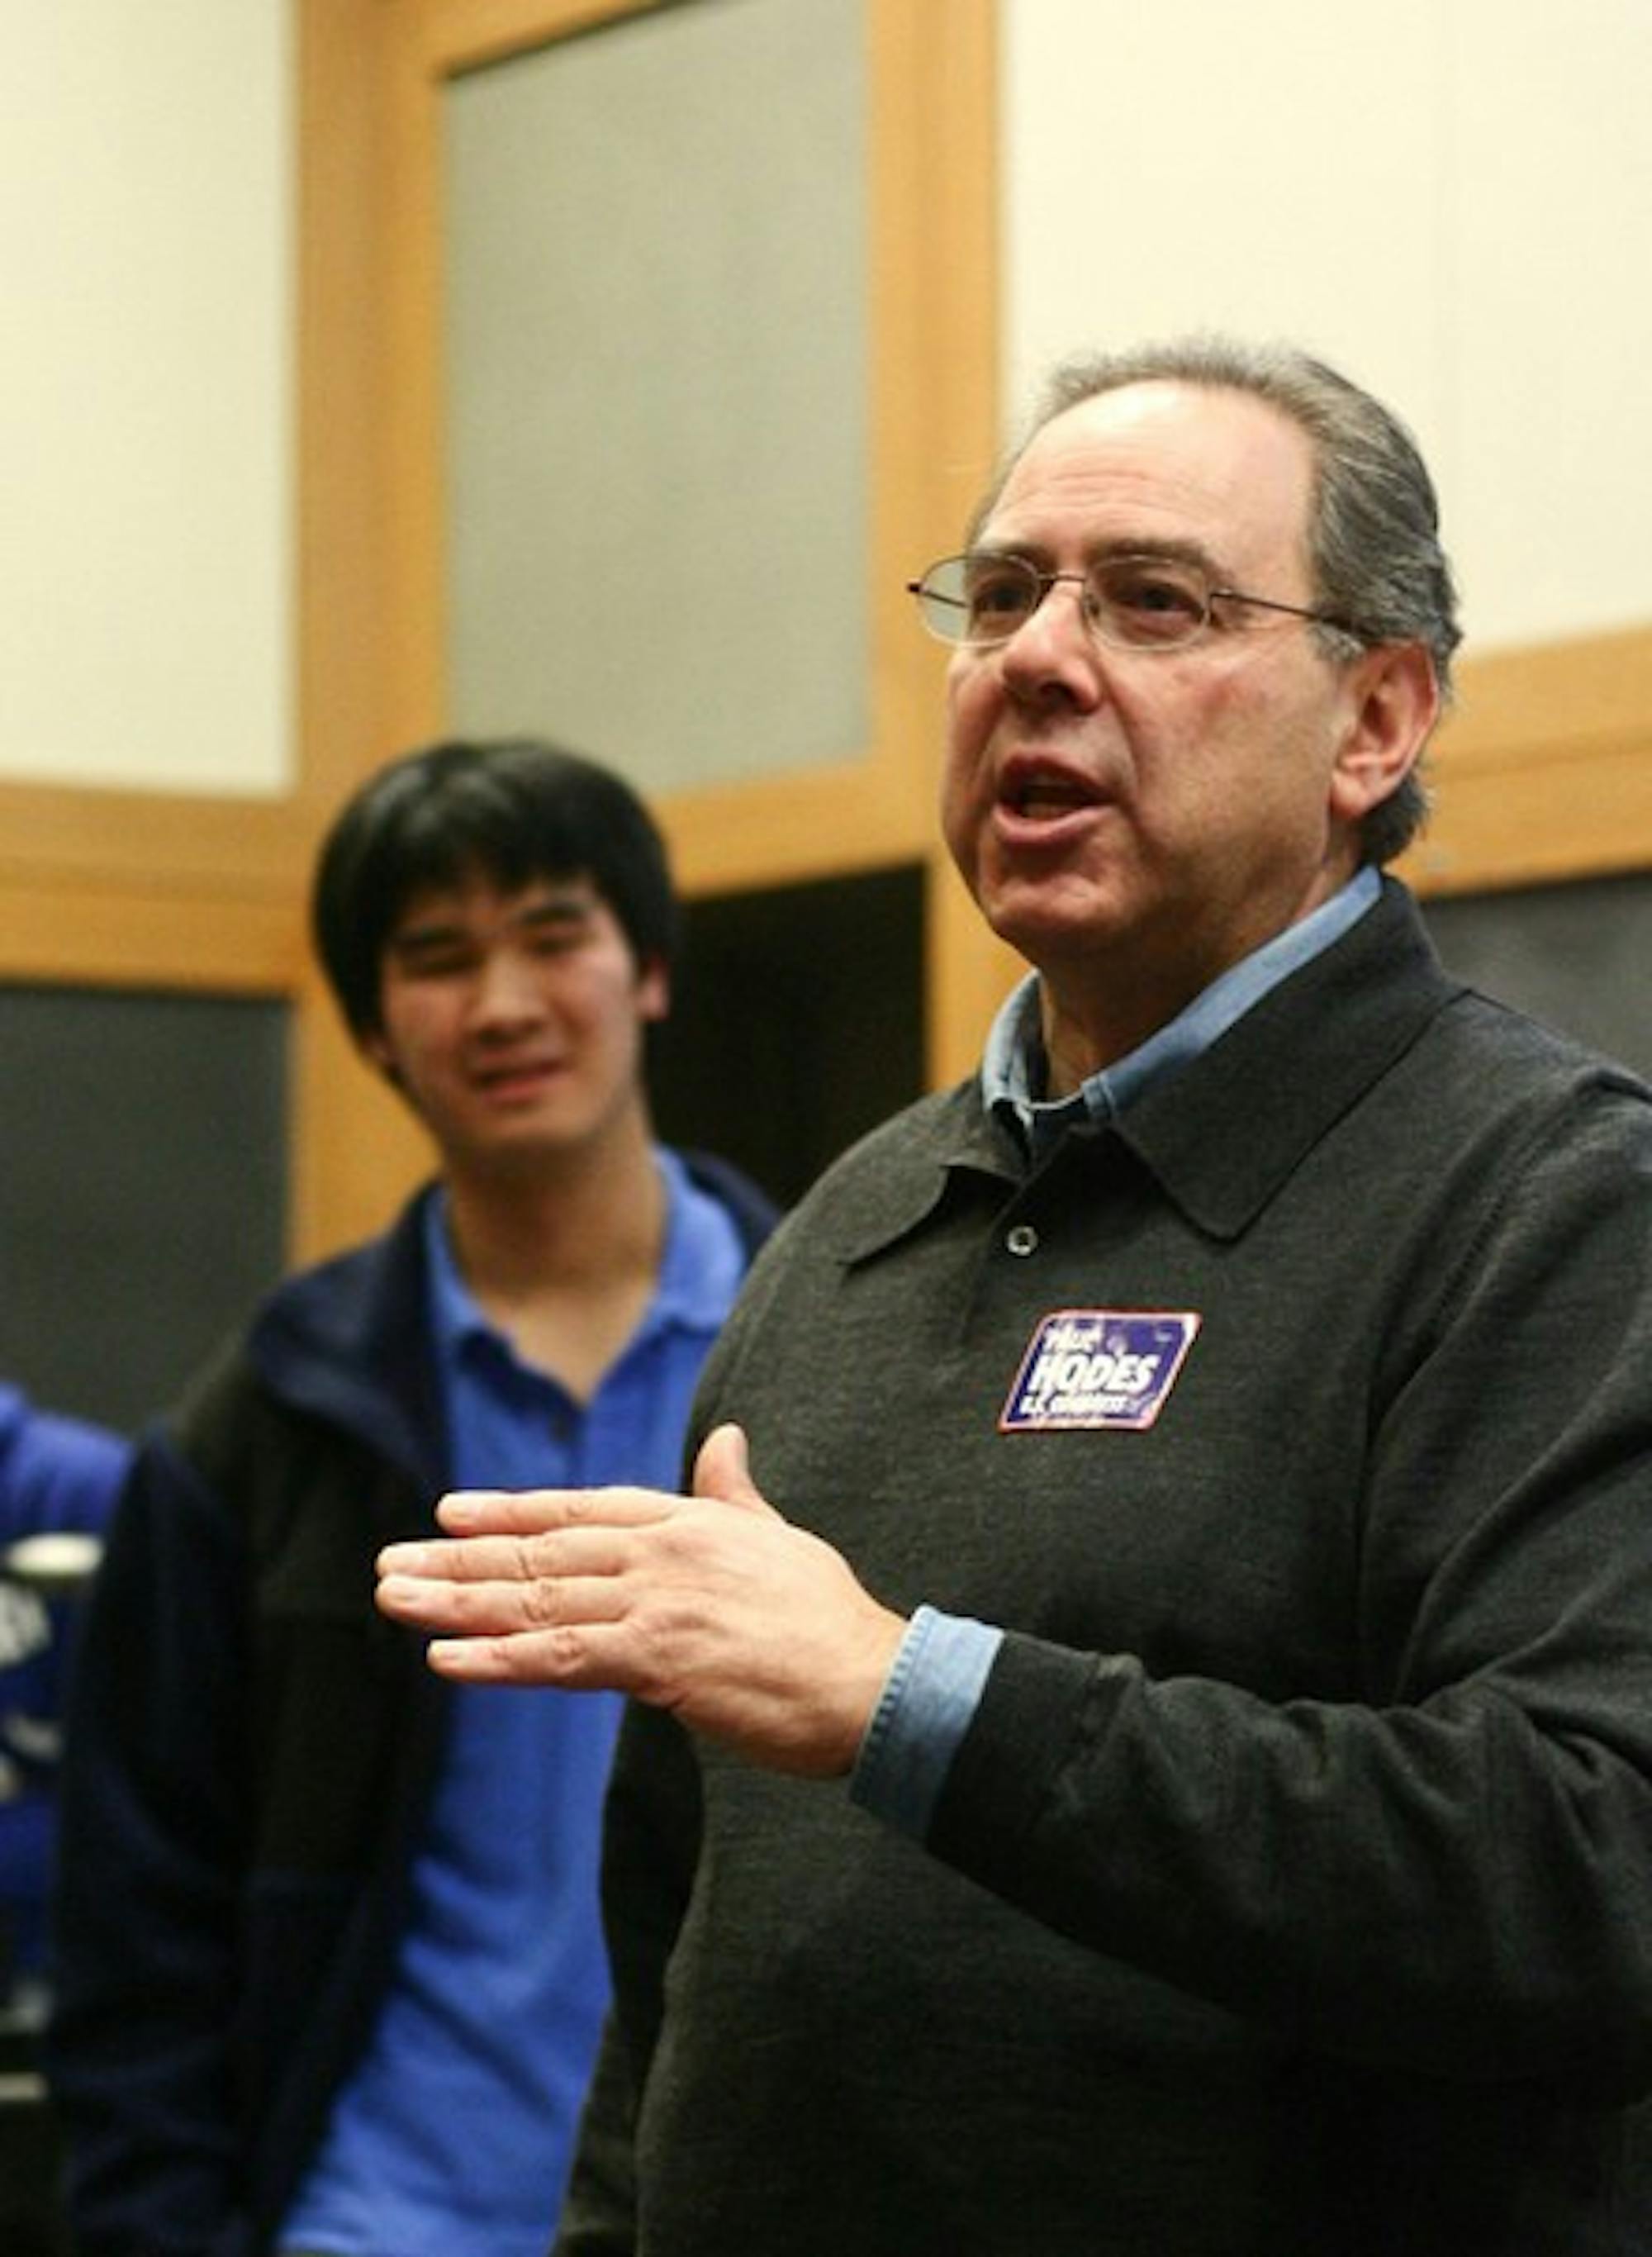 Rep. Paul Hodes '72, D-N.H., campaigns in various campus locales in an effort to pull votes for the entire Democratic ticket in today's election.